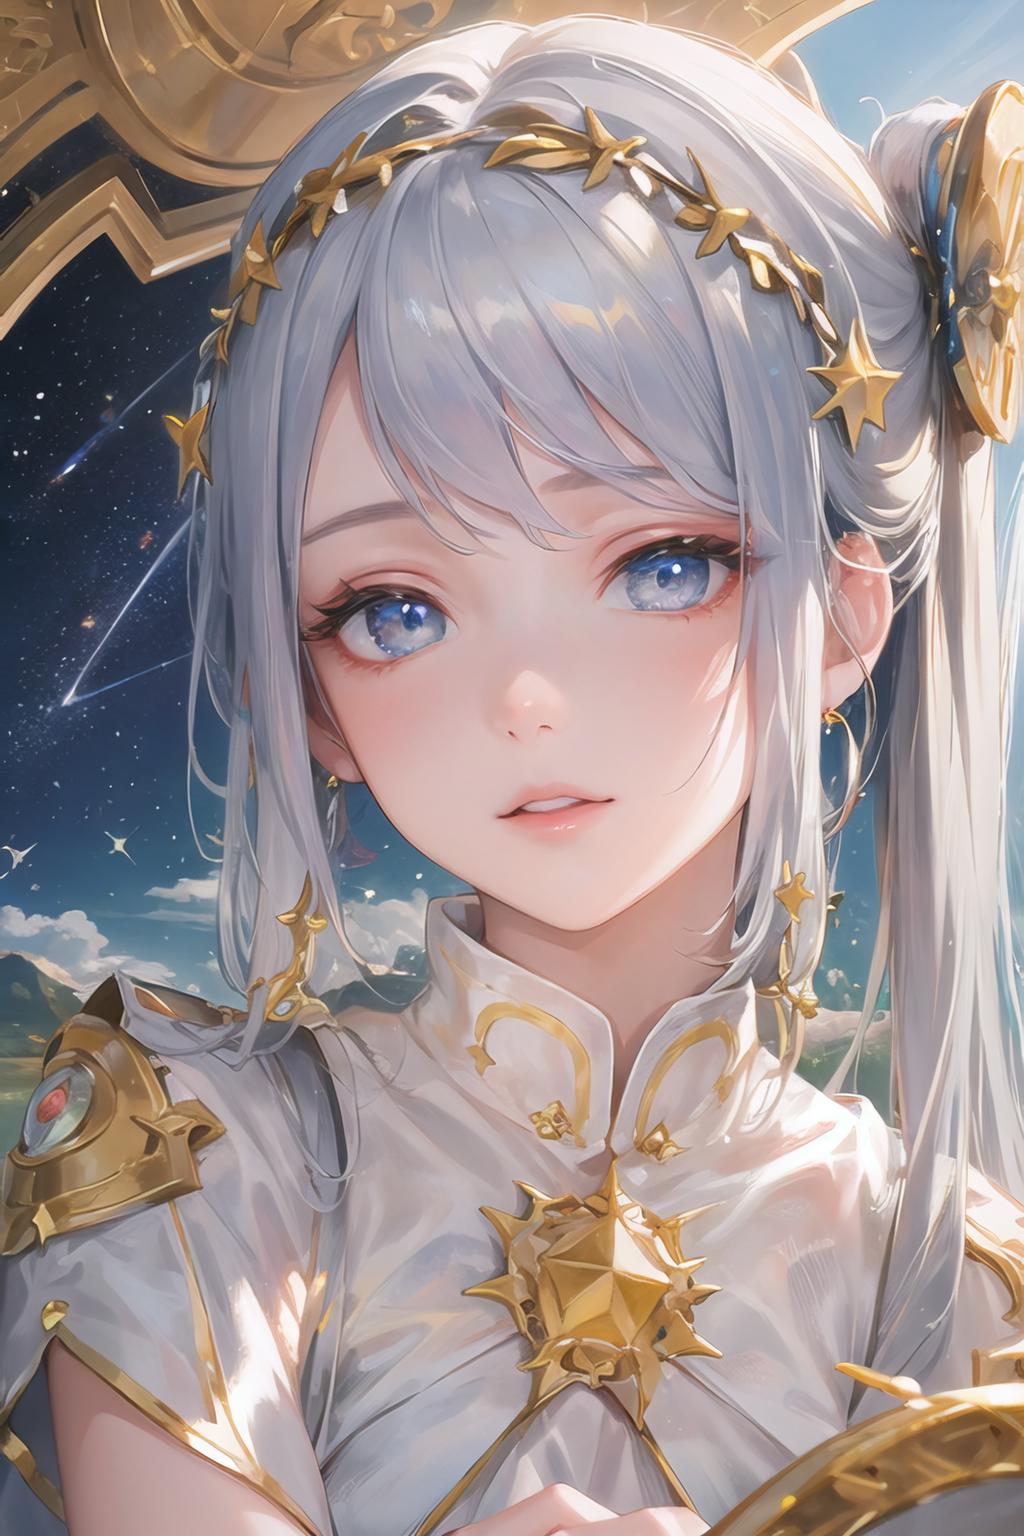 A white-haired girl with blue eyes and a starry background.